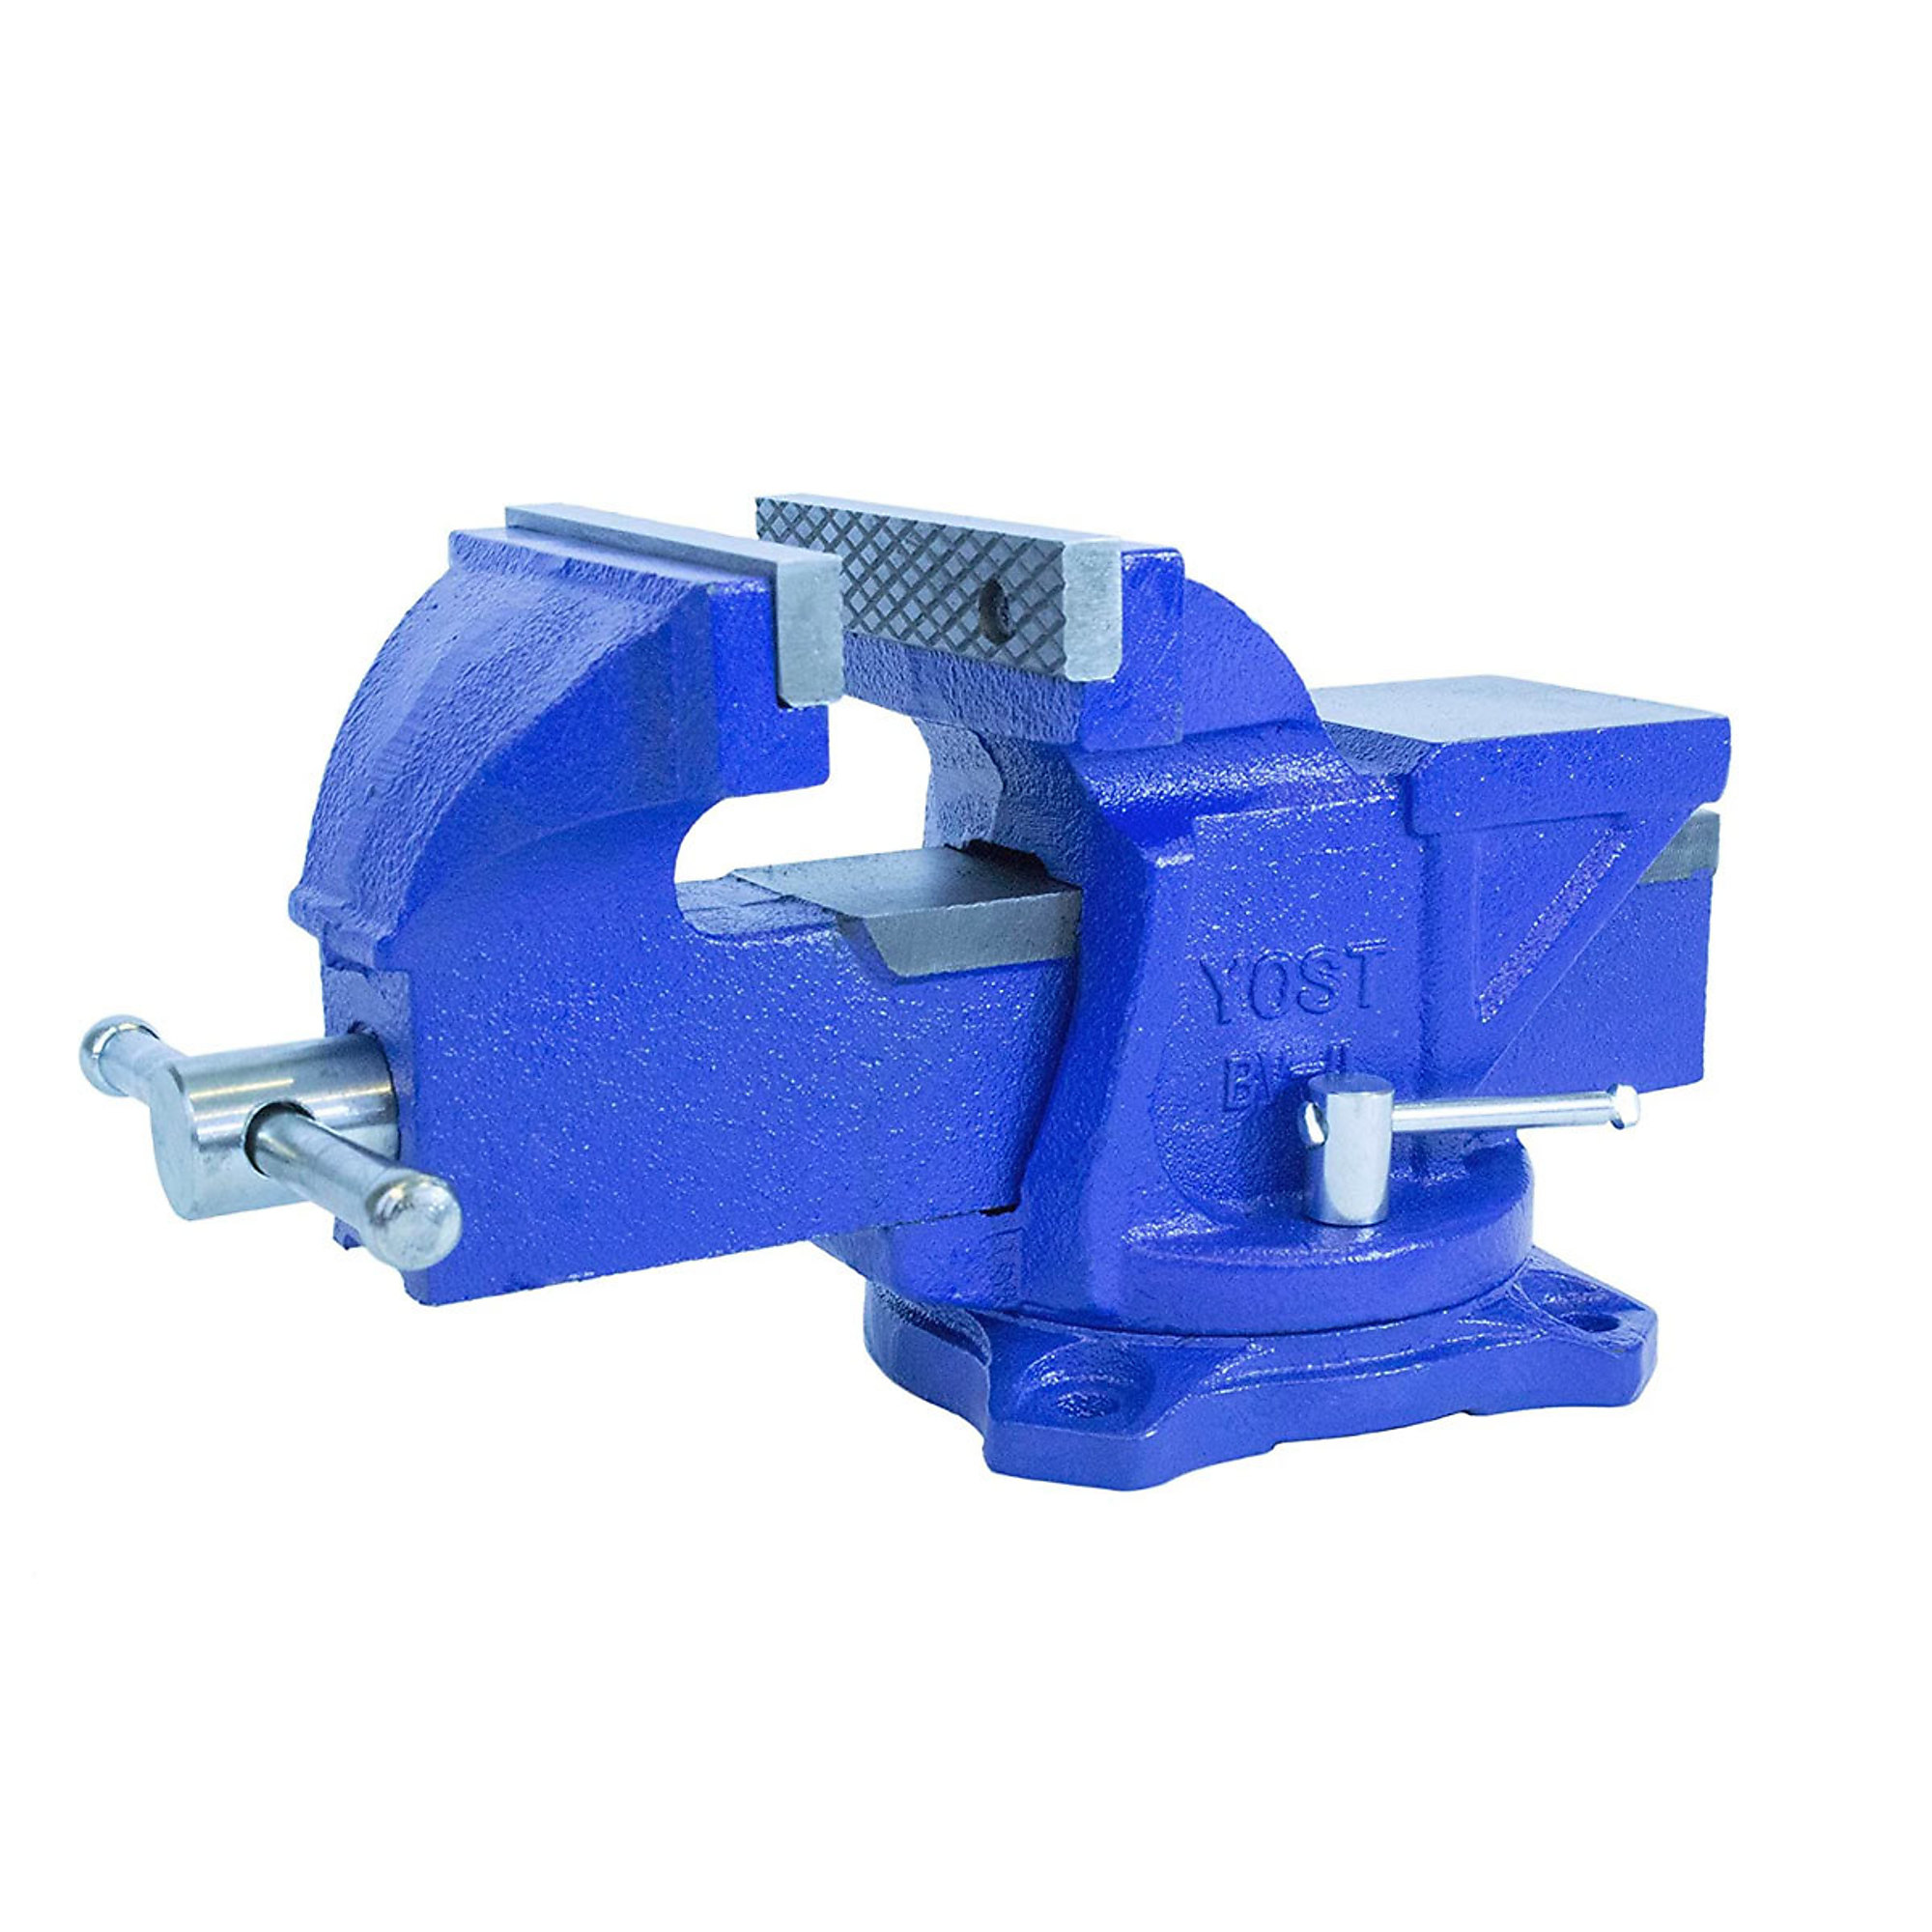 Yost Vises, 4Inch Utility bench Vise, Jaw Width 4 in, Jaw Capacity 3 in, Material Iron, Model BV-4 -  56489